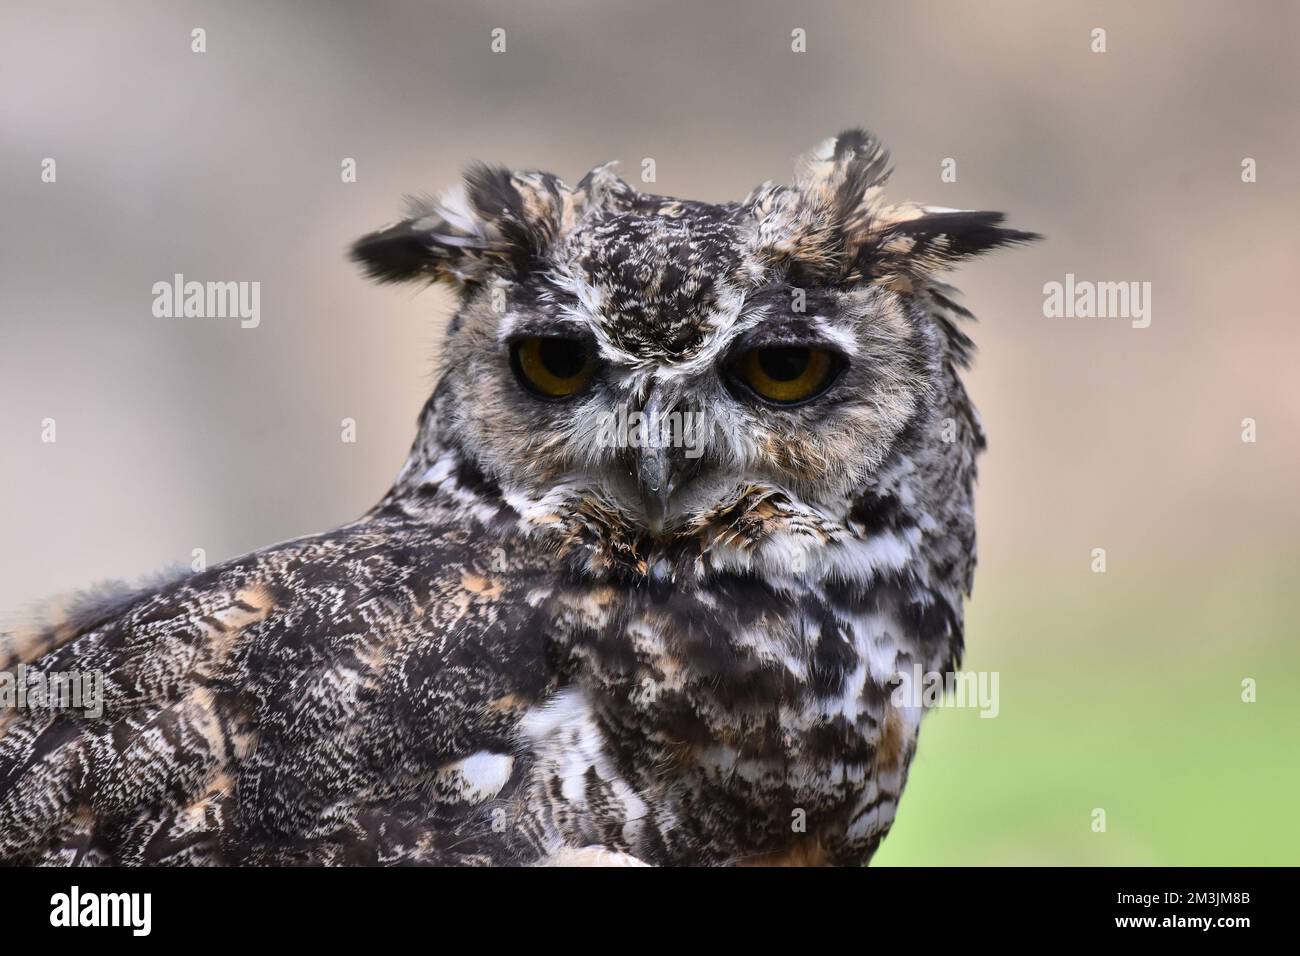 A Virginian Owl species  seen in its habitat during a species conservation program, the zoo has 1803 animals in captivity at Chapultepec Zoo. Stock Photo